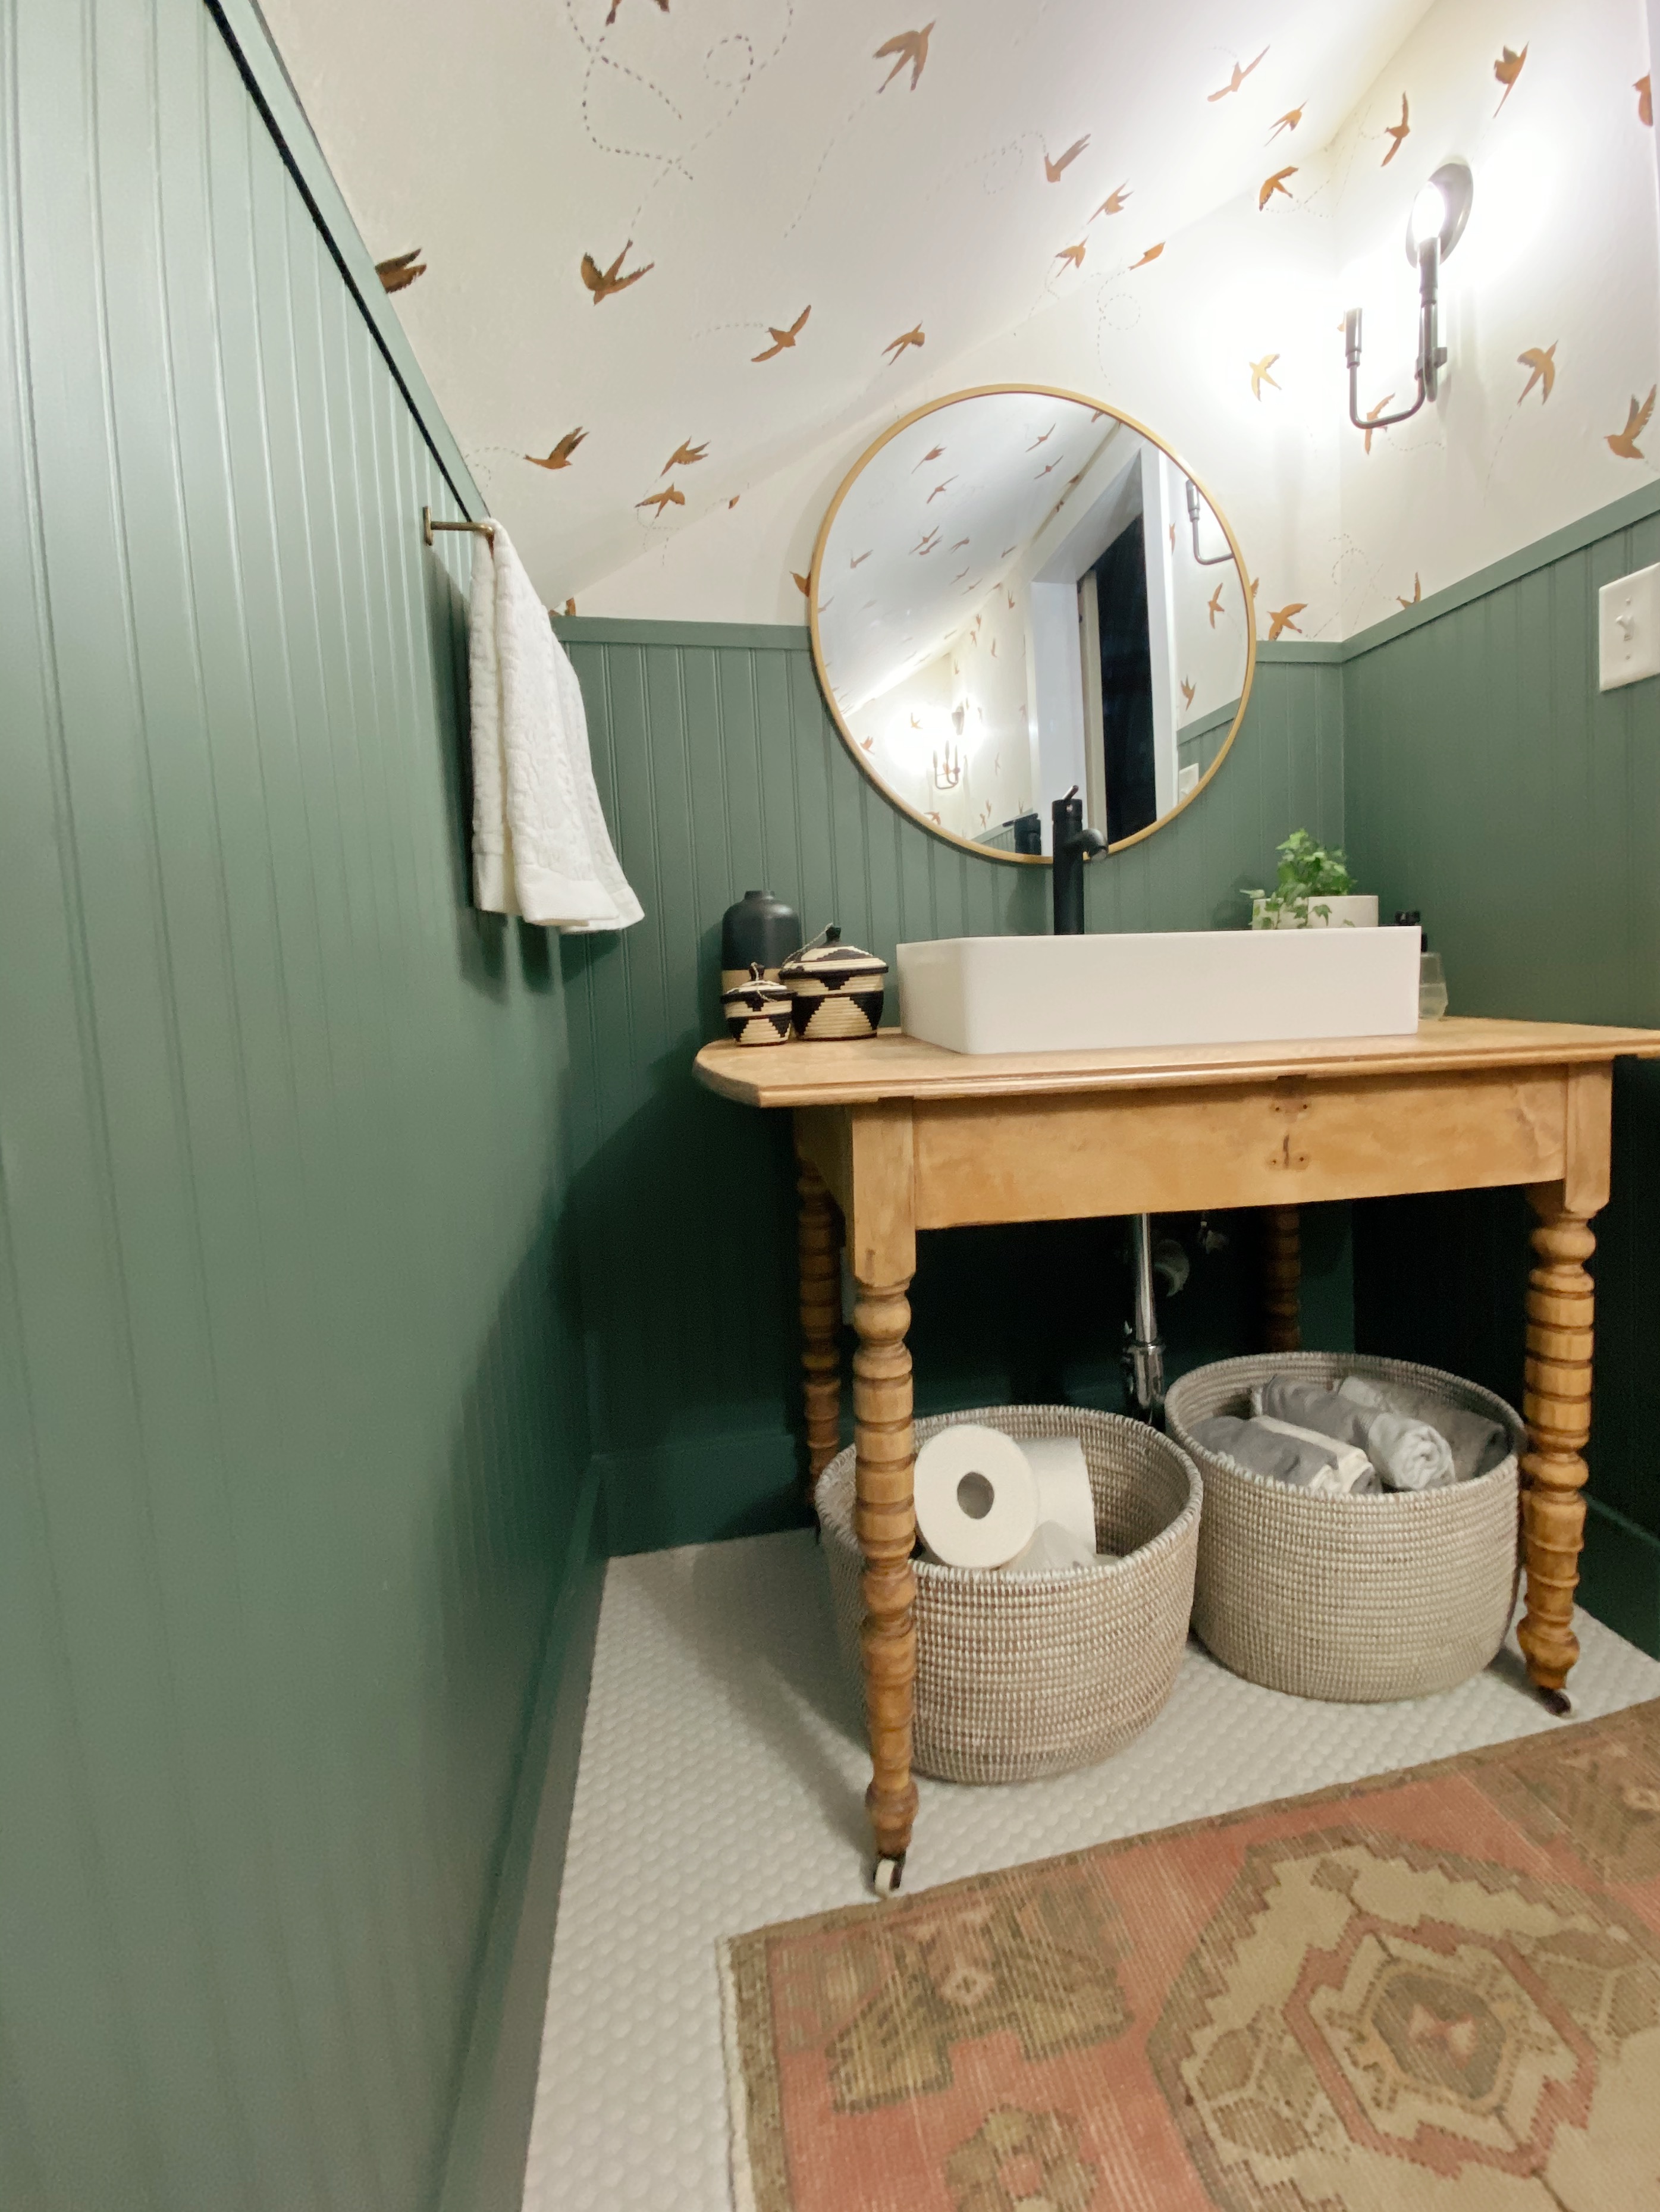 Five things to think about when you are considering creating a vessel sink stand in a bathroom. Check out how we took an old table and transformed it into a bathroom vanity!